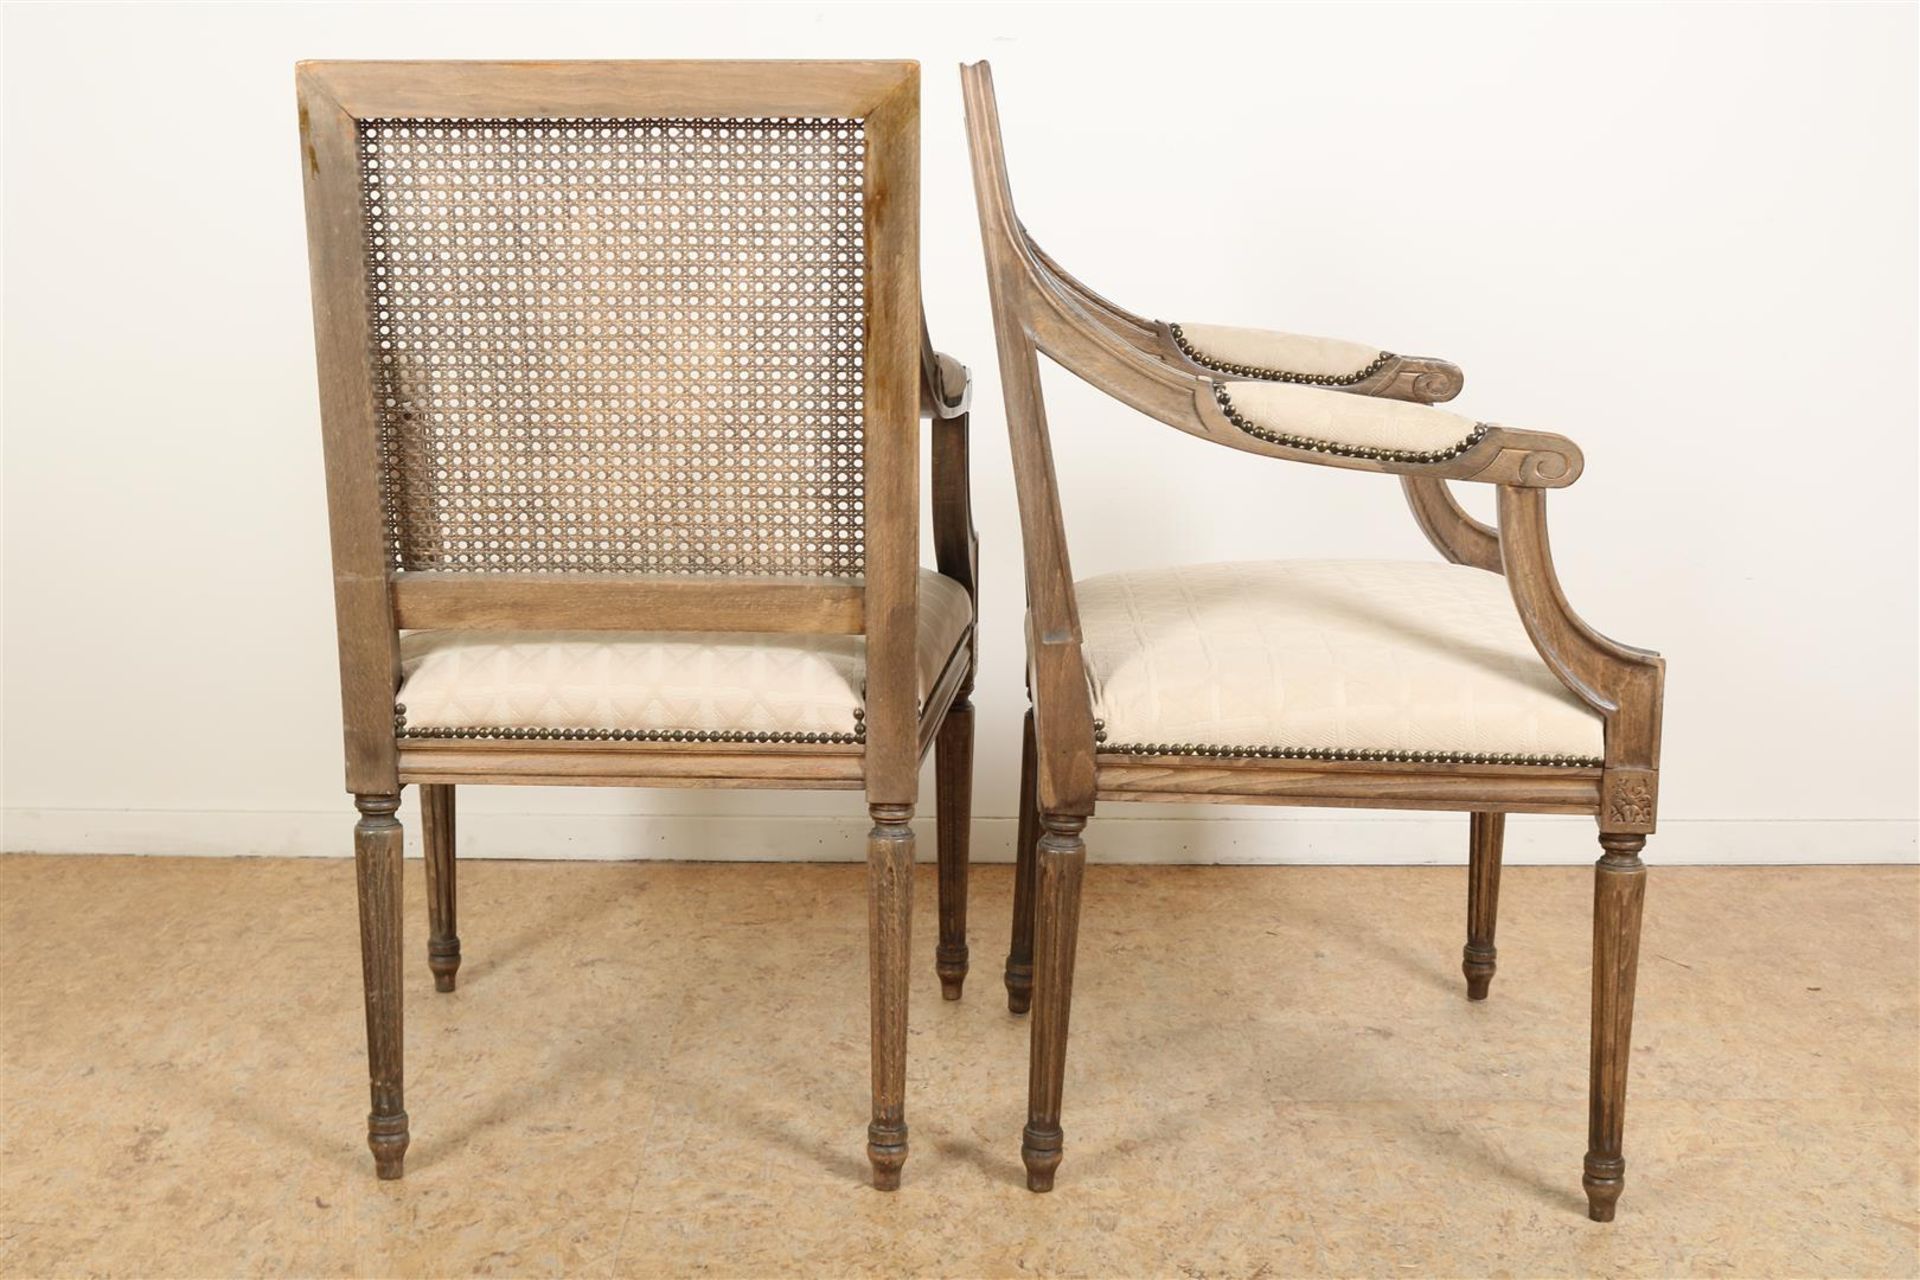 Set of Louis XVI style armchairs with woven backrest and checkered upholstery. - Image 5 of 5